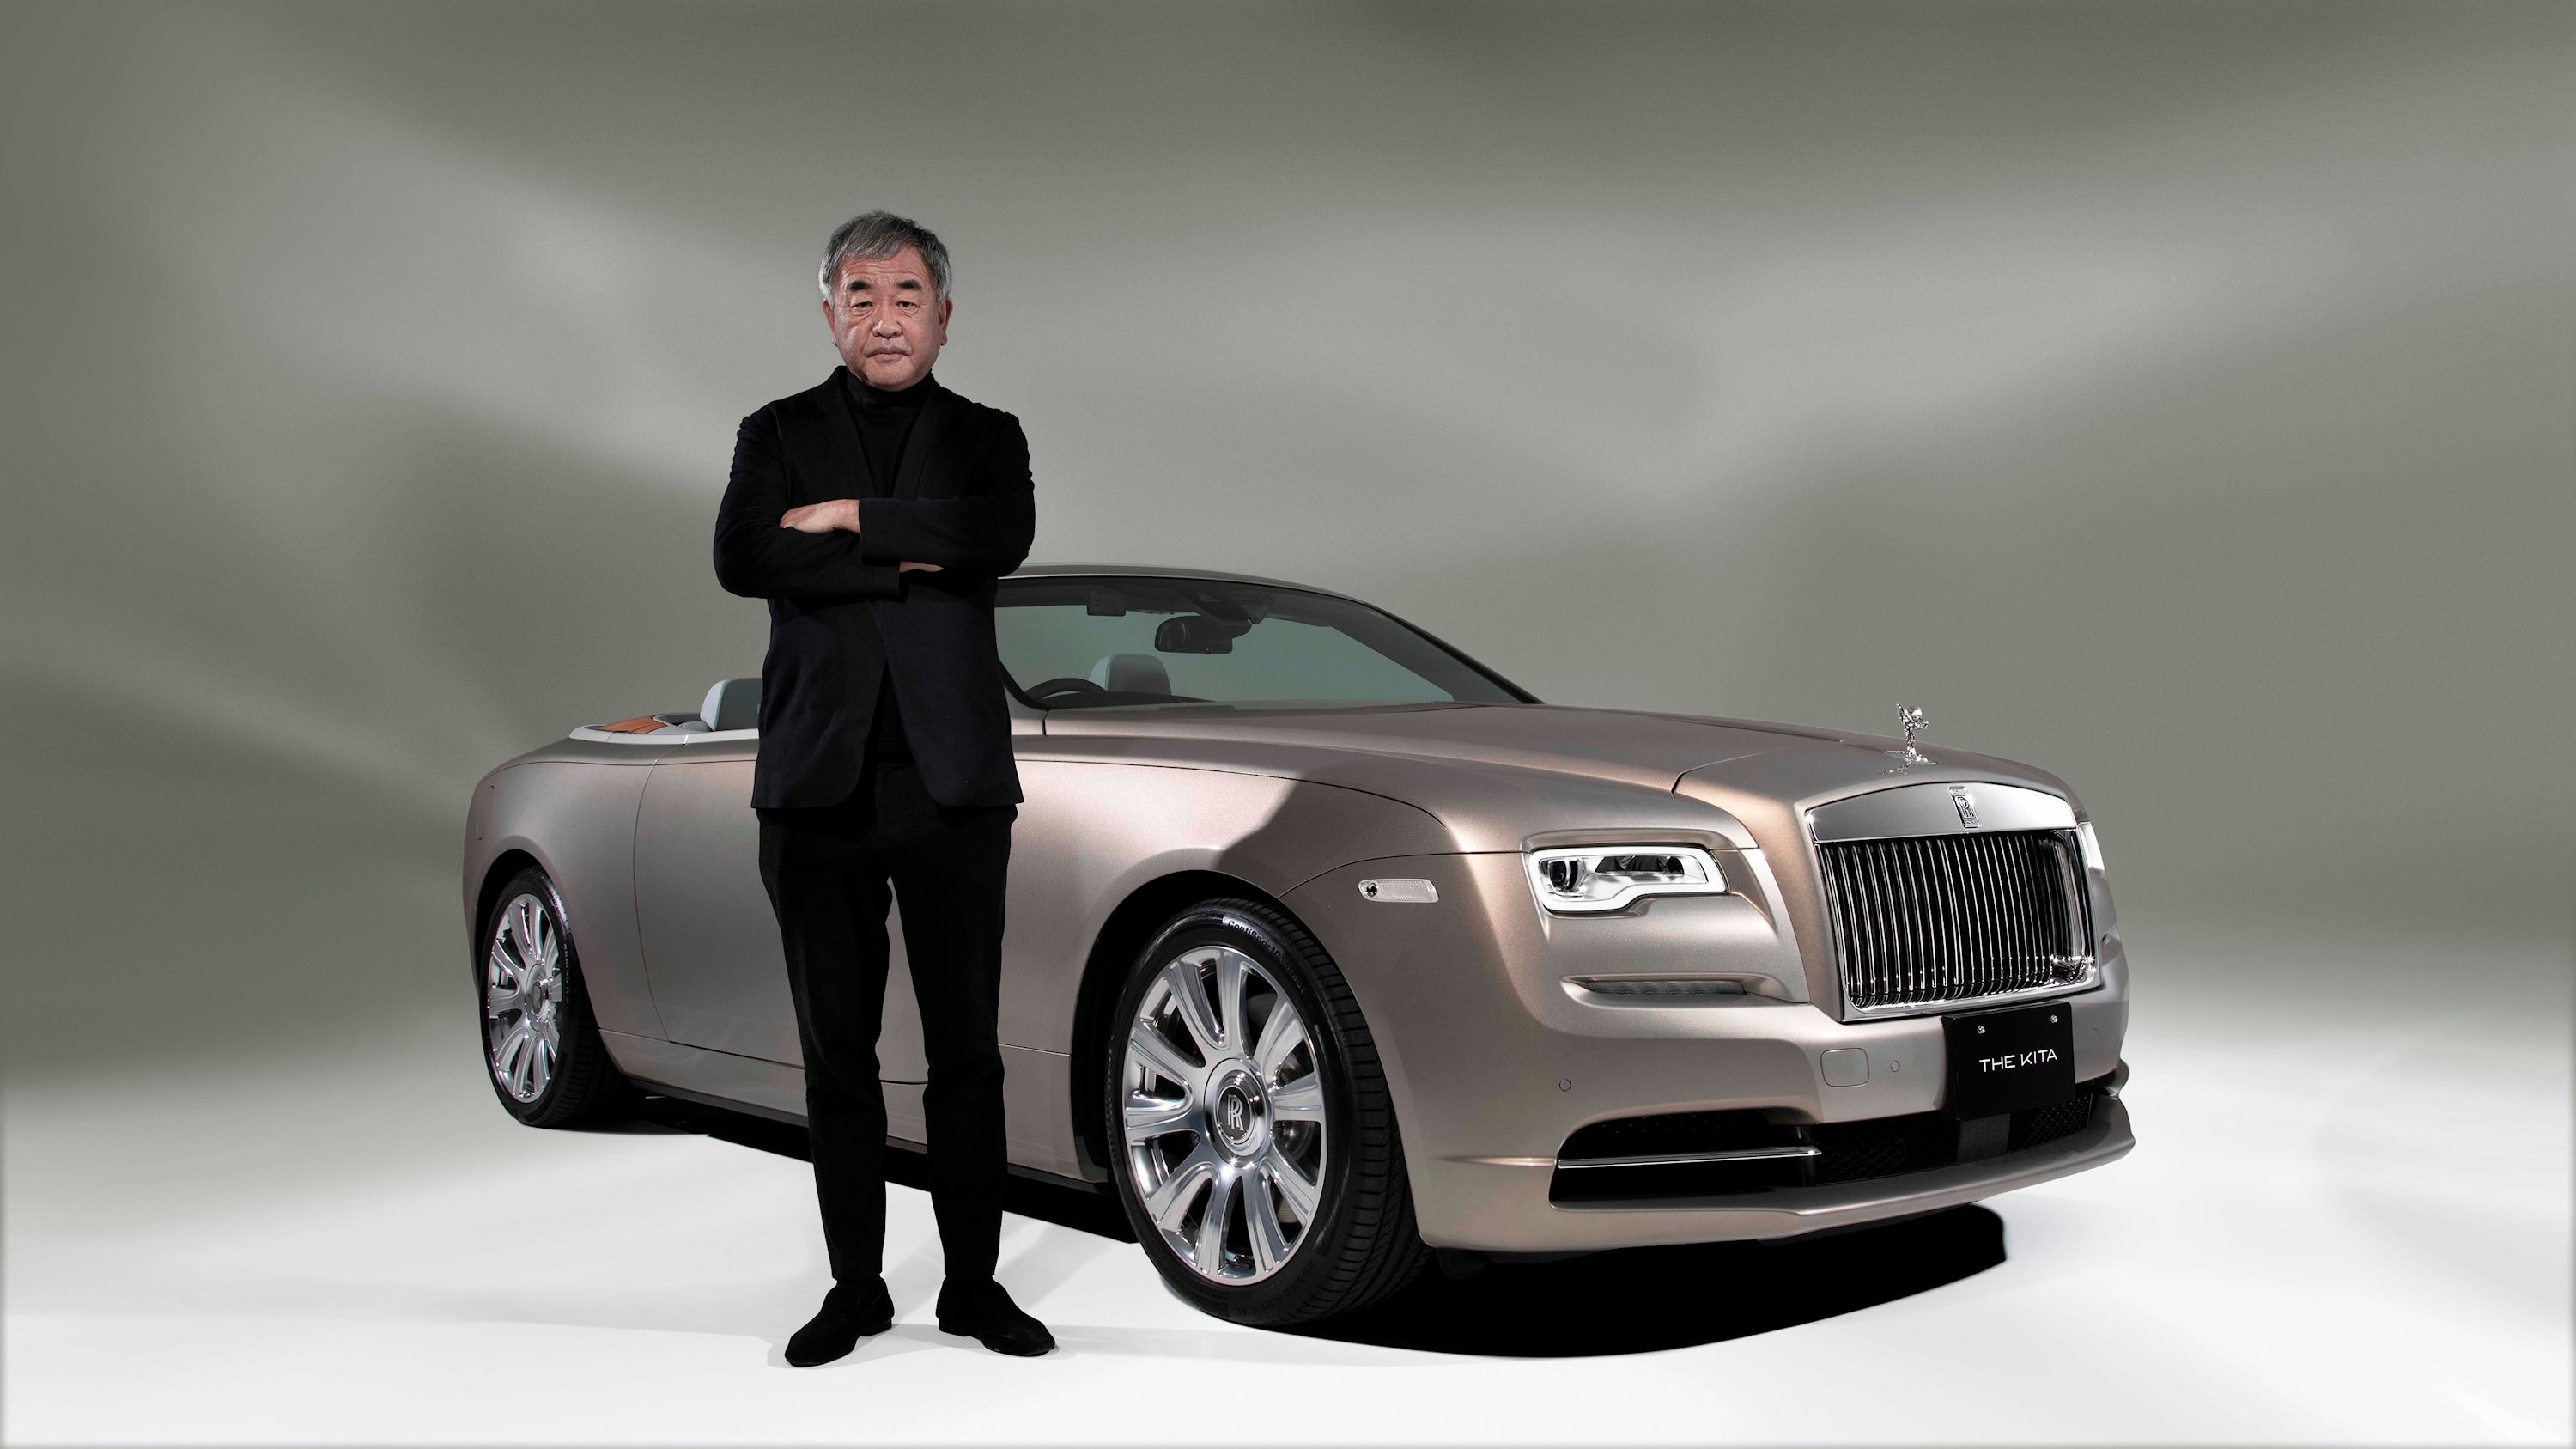 C! Magazine  CRAFTING DREAMS INTO REALITY: ROLLS-ROYCE REFLECTS ON A YEAR  OF MAGNIFICENT BESPOKE COMMISSIONS